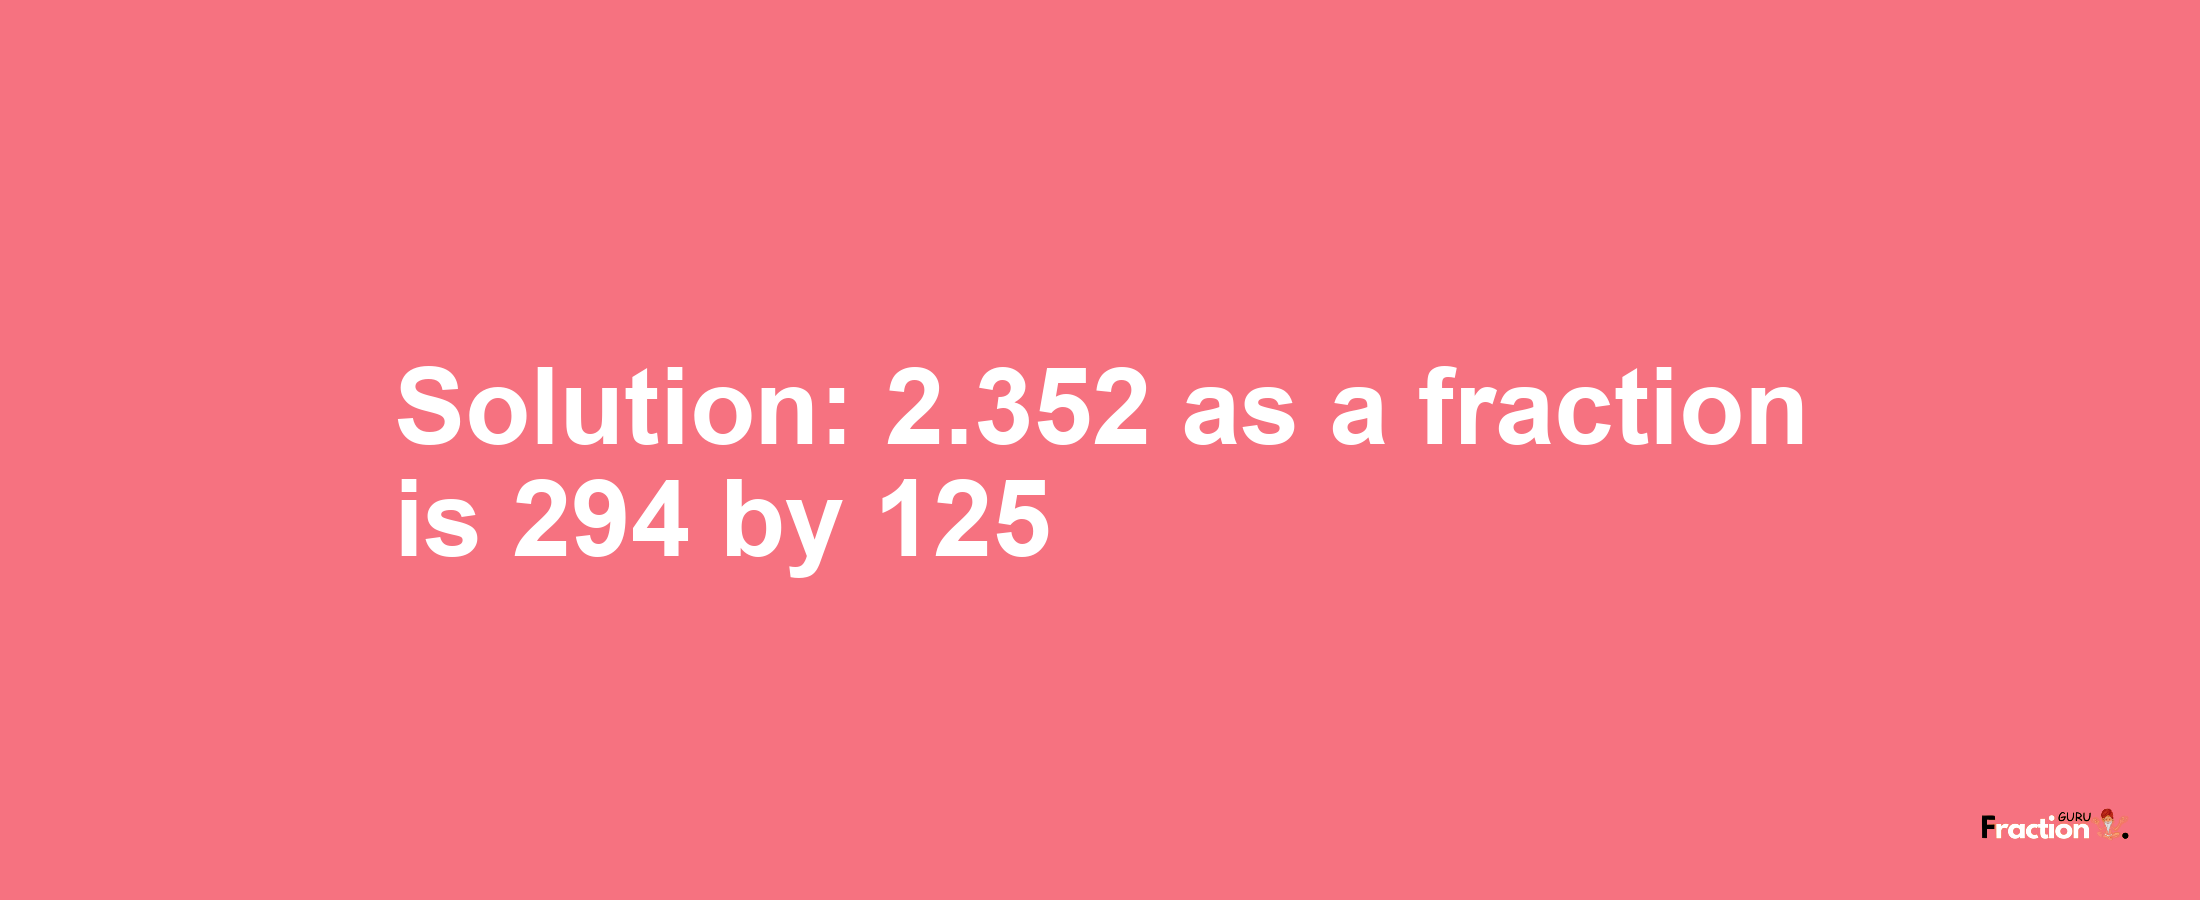 Solution:2.352 as a fraction is 294/125